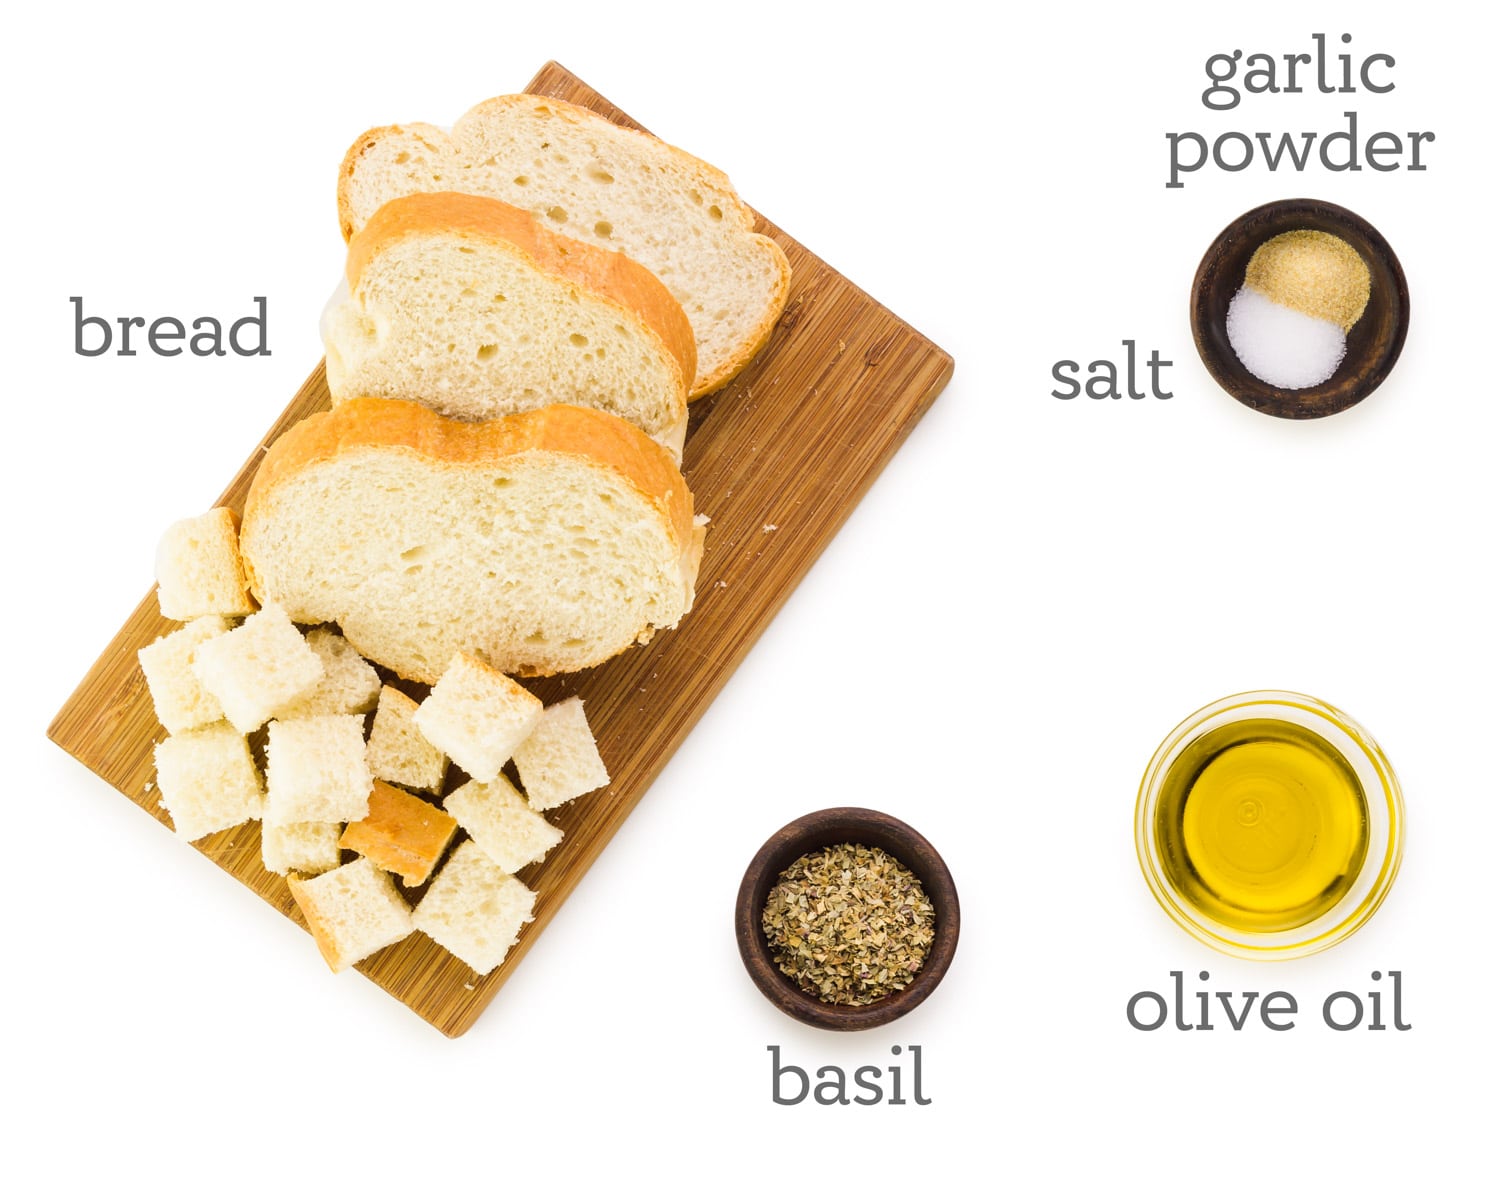 Ingredients are laid out on a table. The labels next to them read, garlic powder, salt, olive oil, basil, and bread.